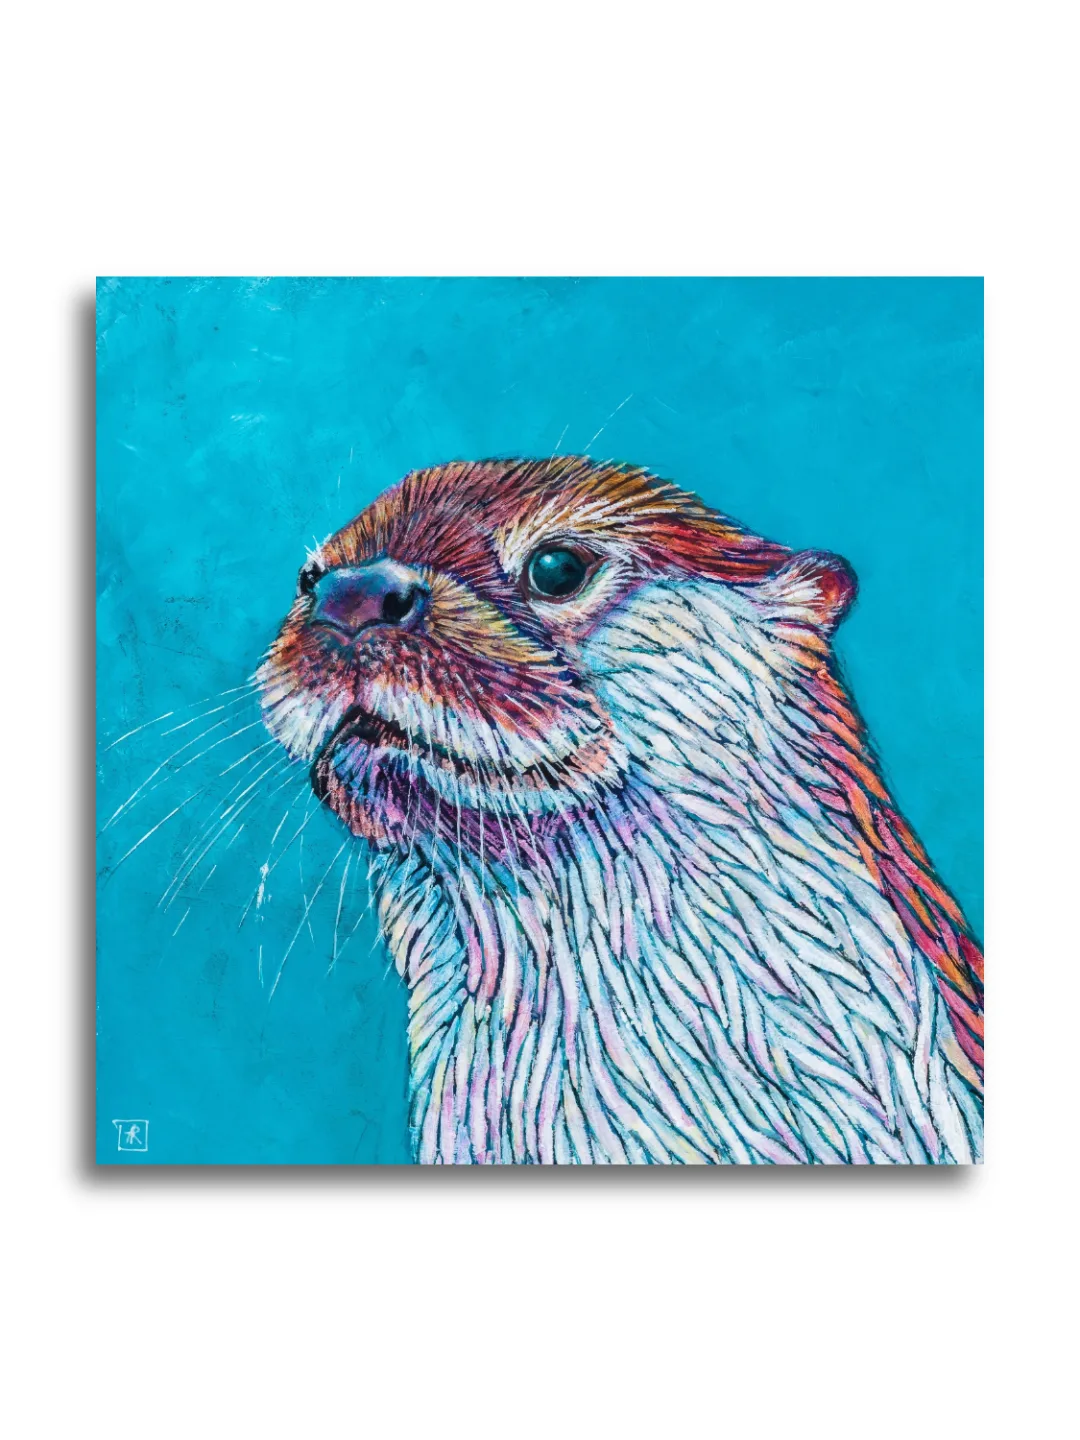 Blue Otter by Ann Richmond - A beautiful Fine-Art Print of a River Otter. Limited inventory remains in our Print Sale...